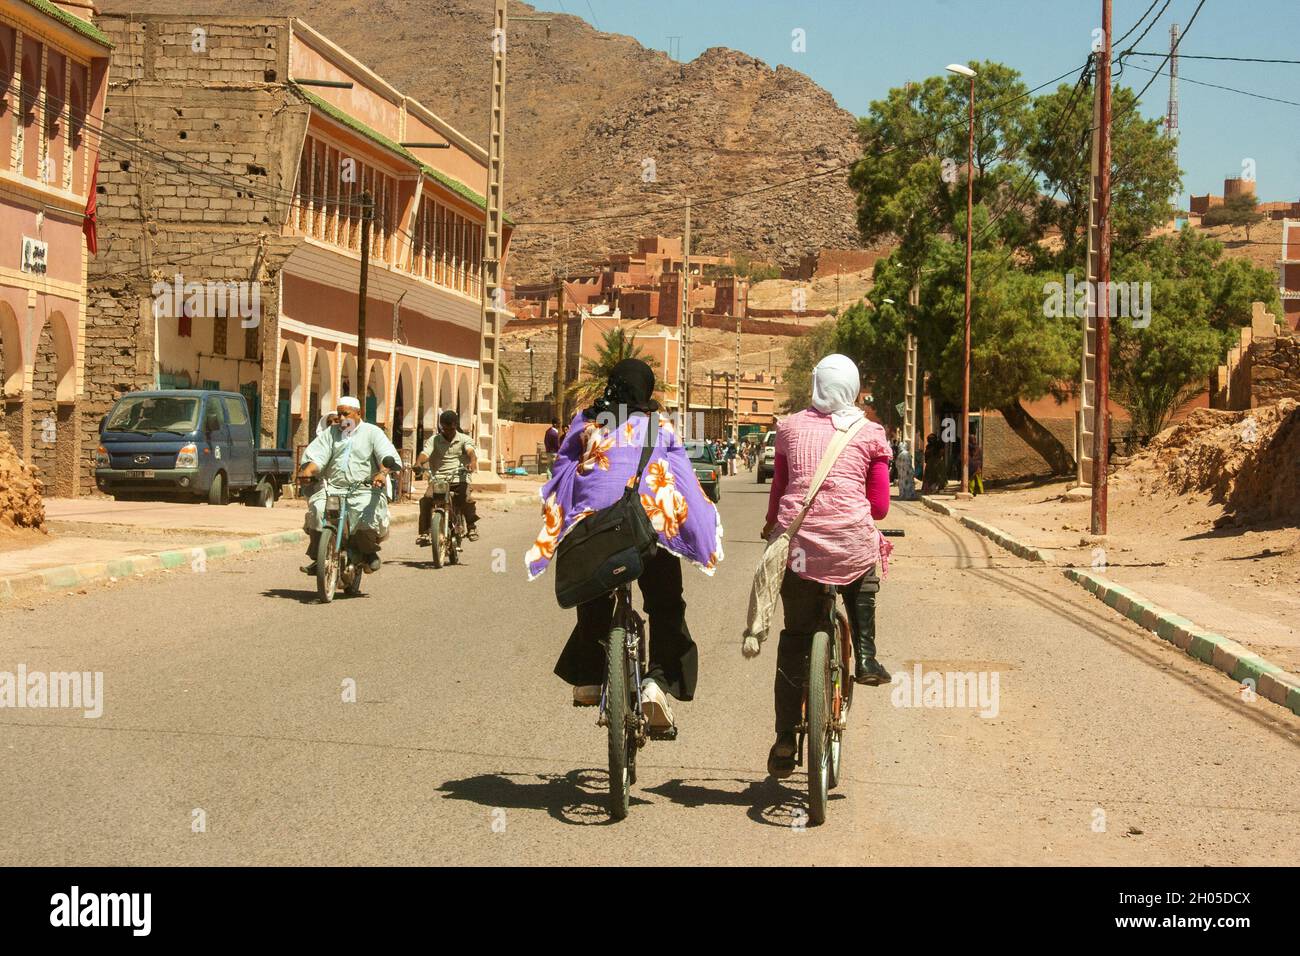 bicycle and scooter traffic in a remote, rural village in Morocco Stock Photo